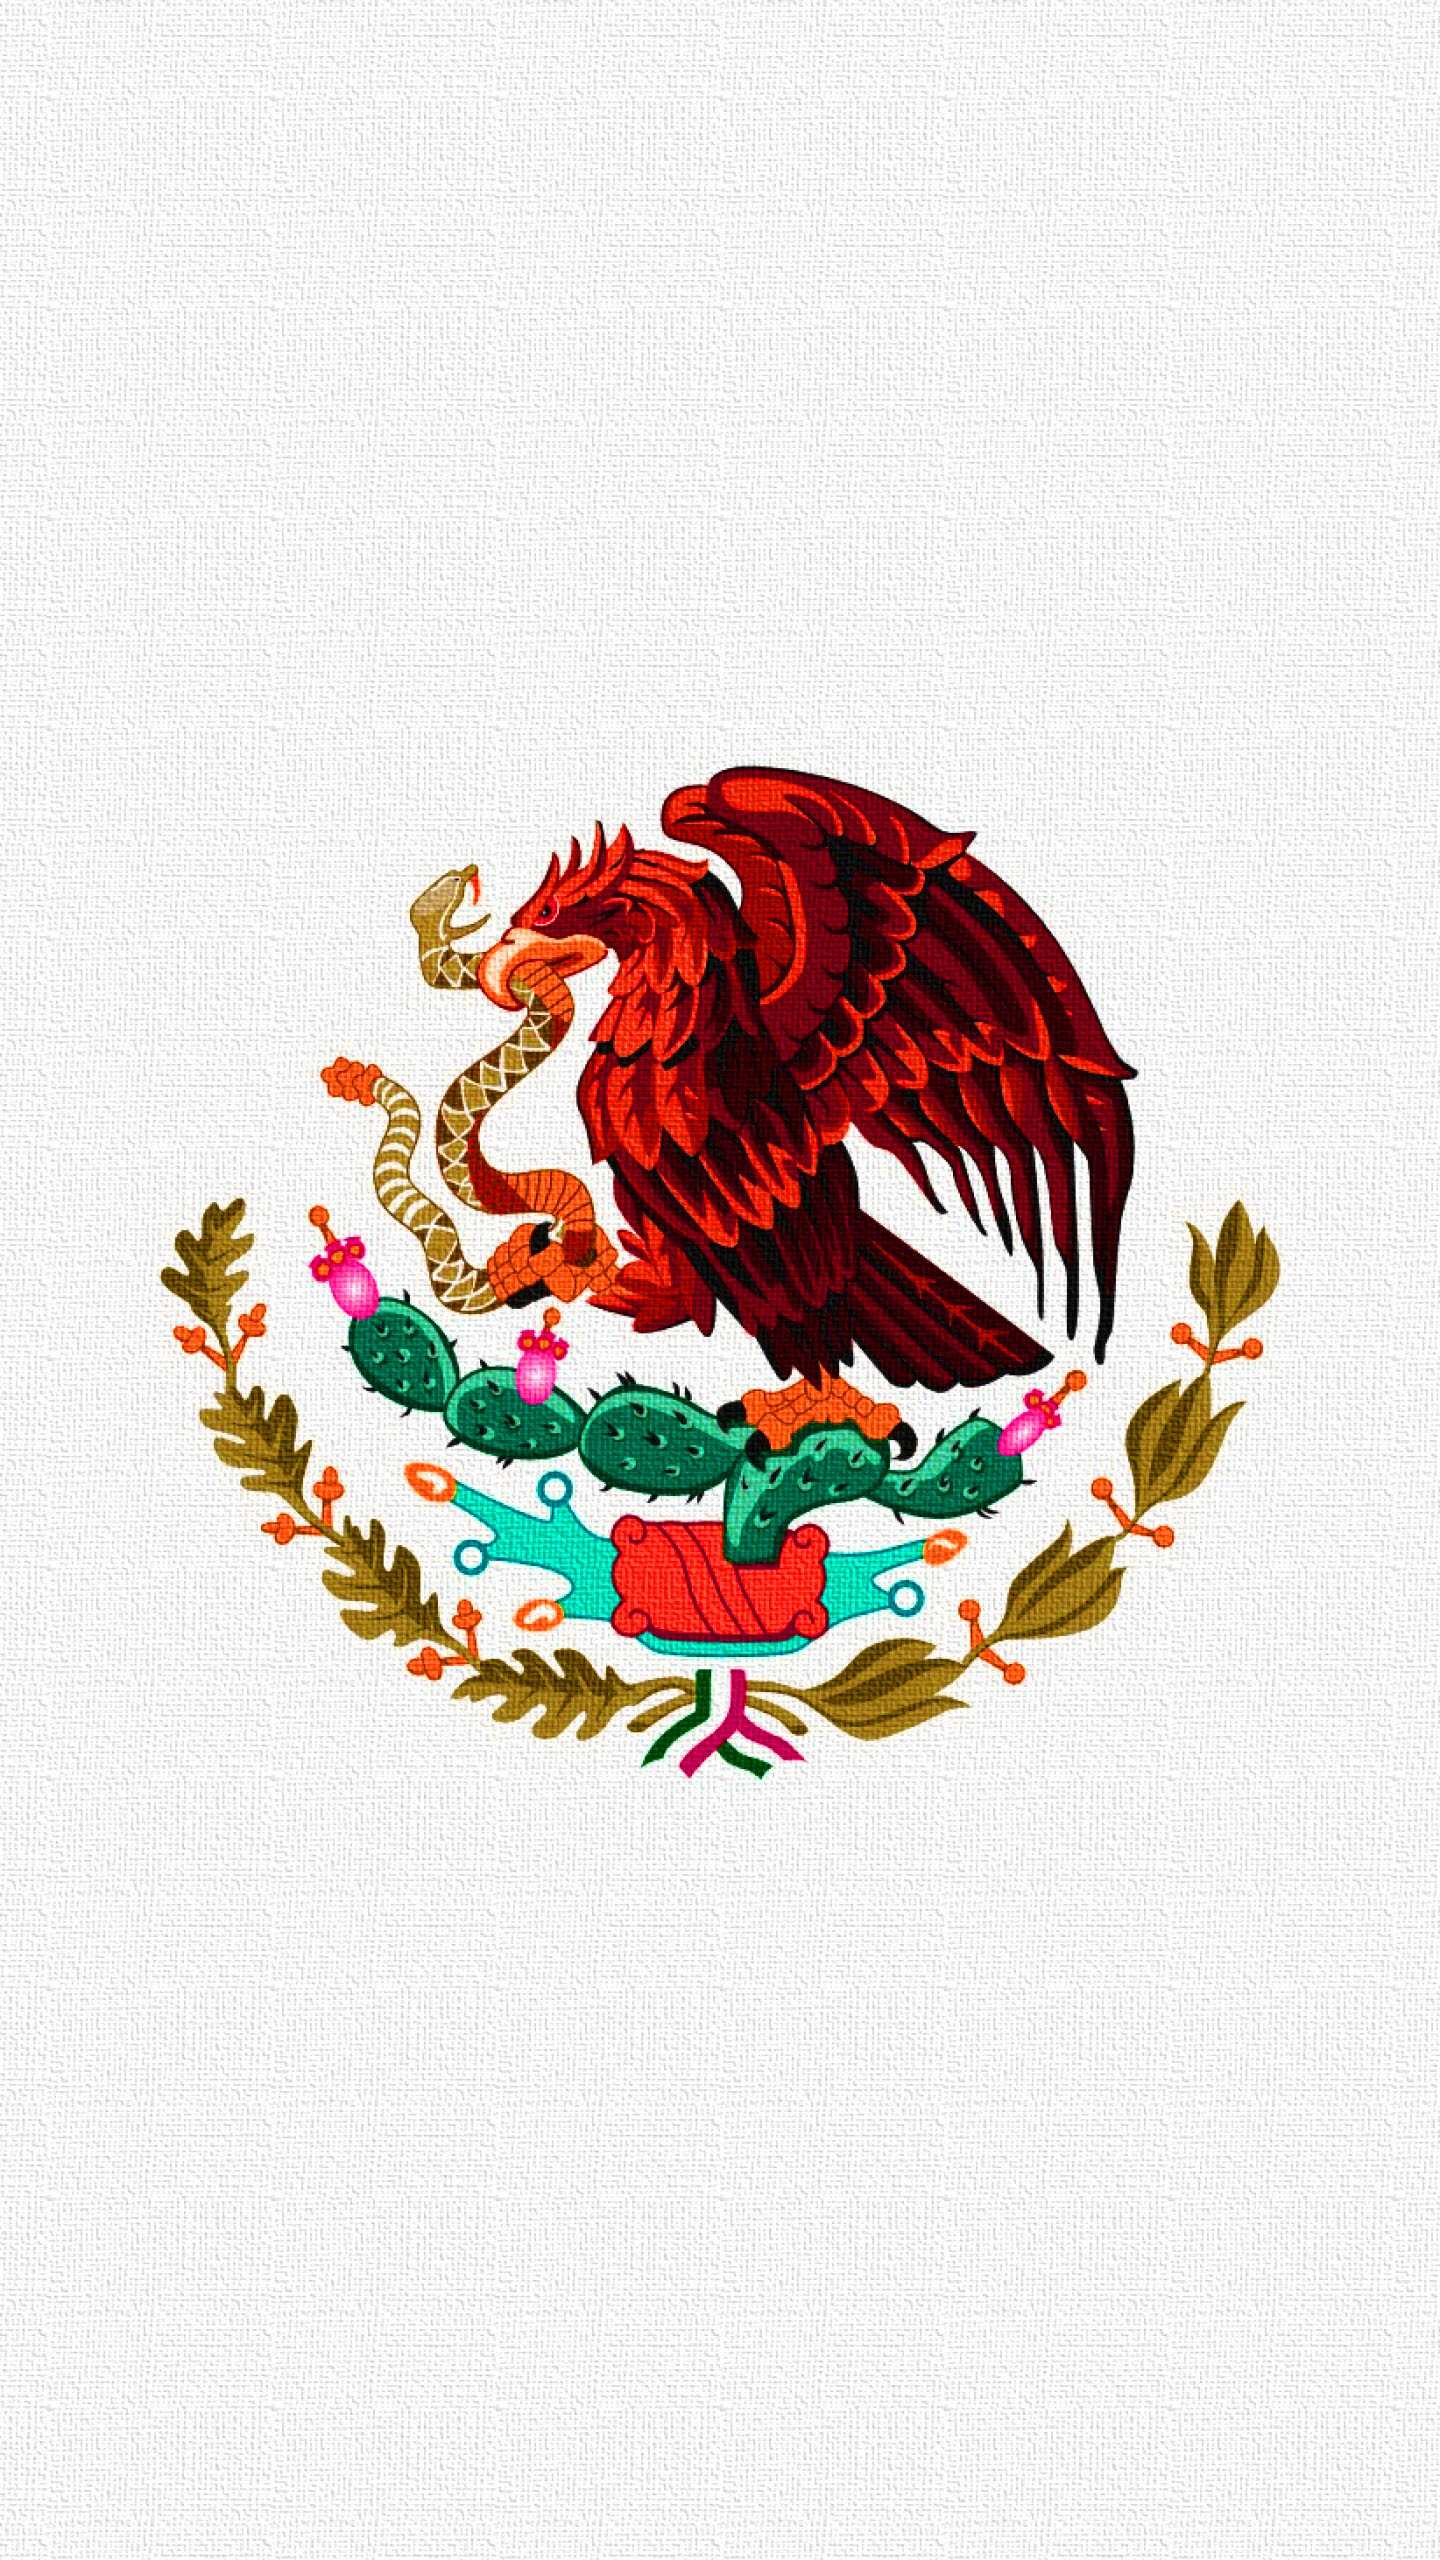 IPhone wallpaper of the Mexican coat of arms - Mexico